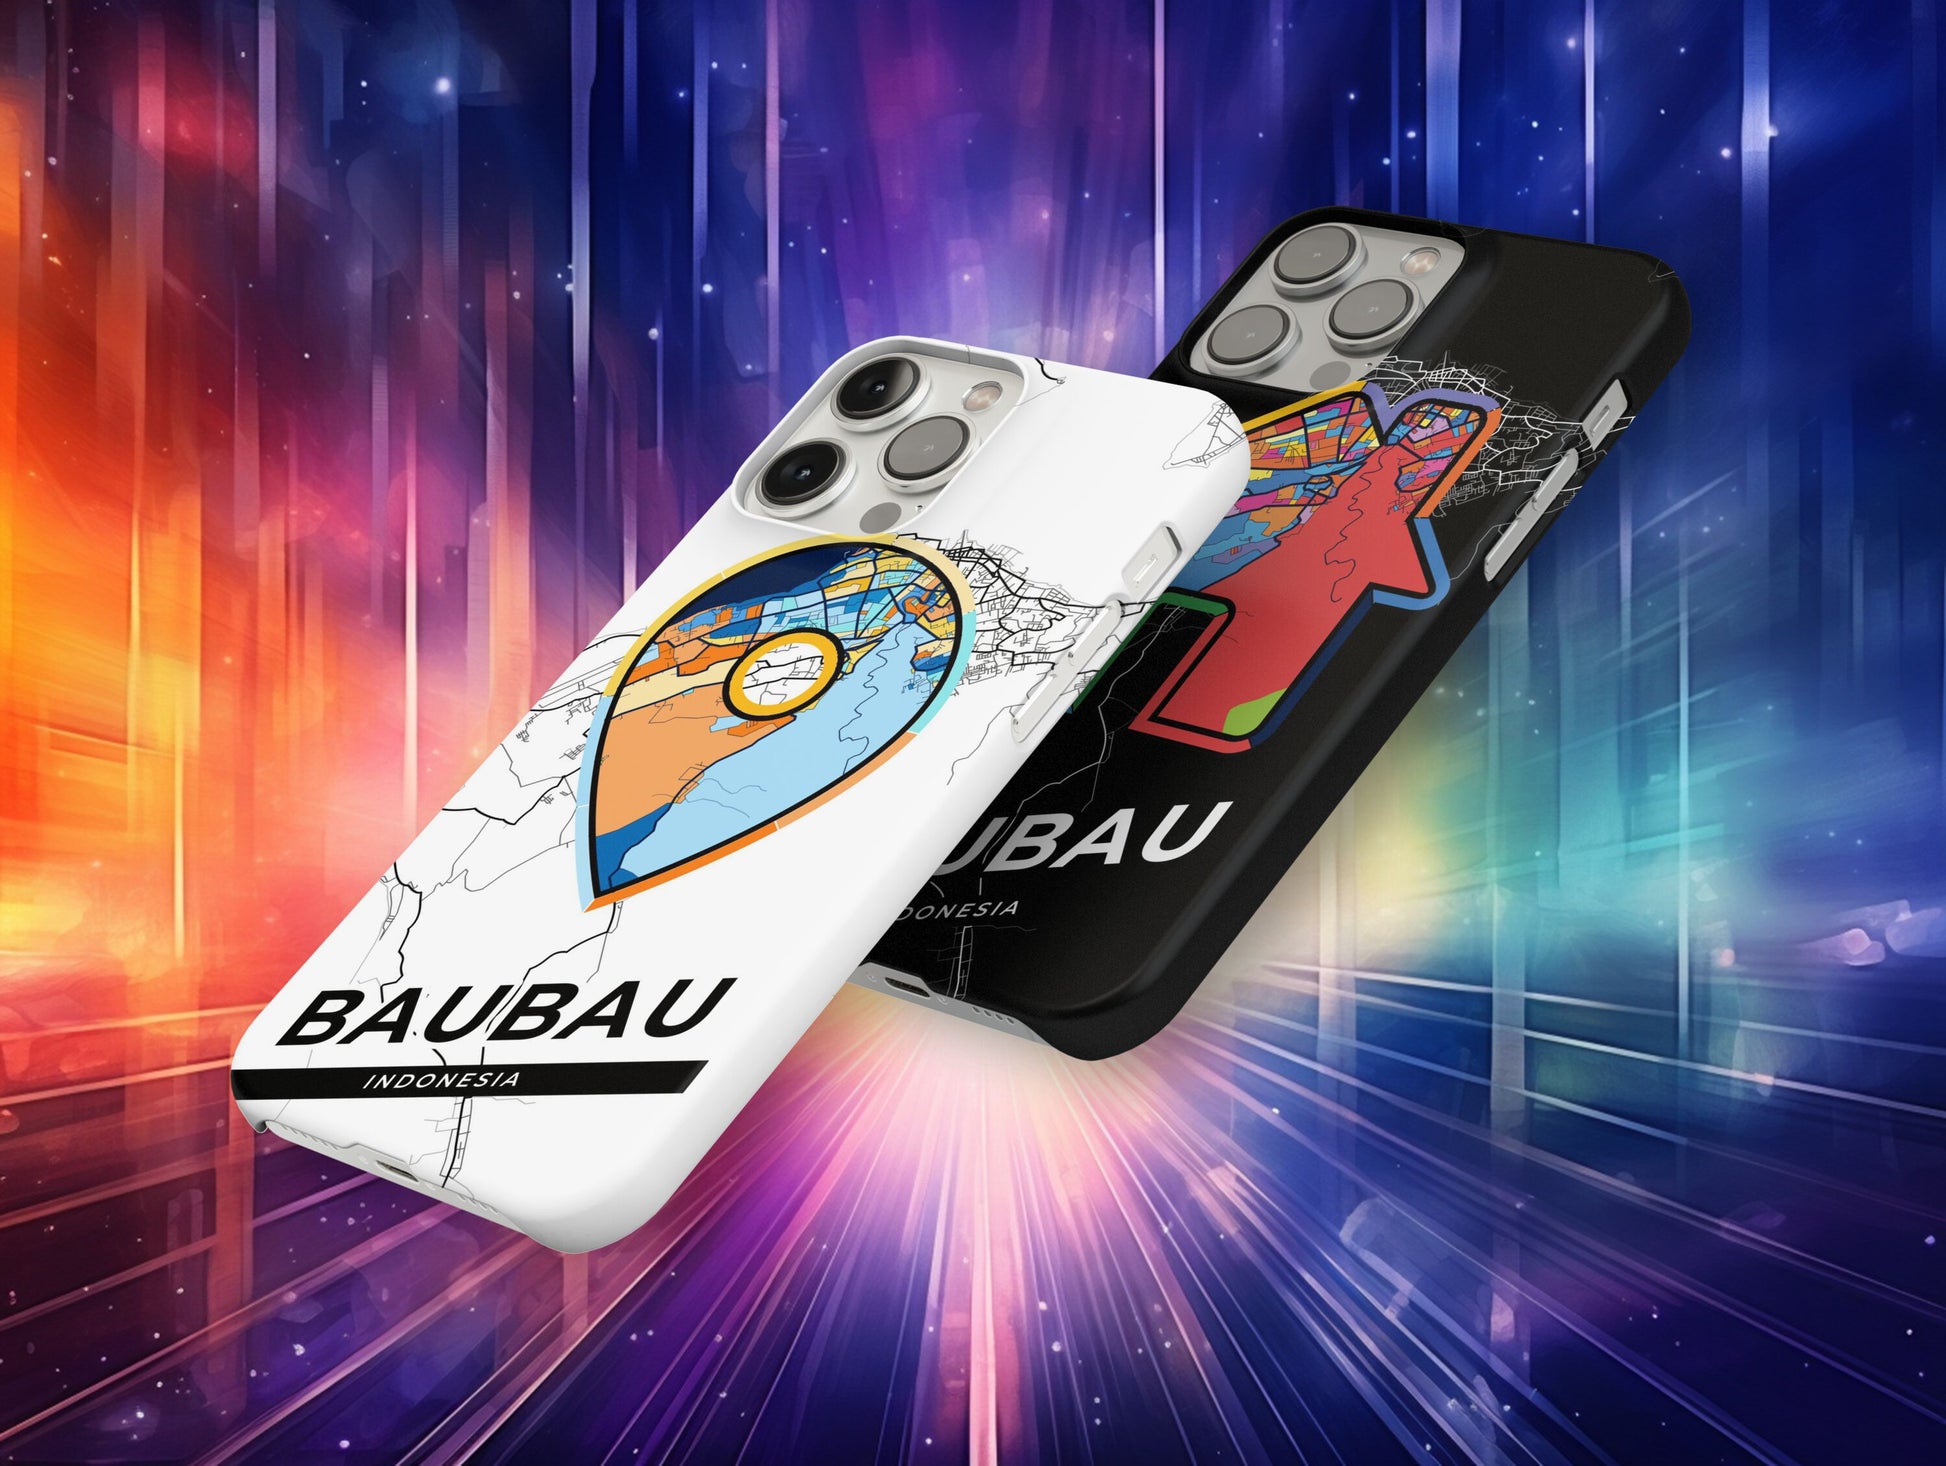 Baubau Indonesia slim phone case with colorful icon. Birthday, wedding or housewarming gift. Couple match cases.